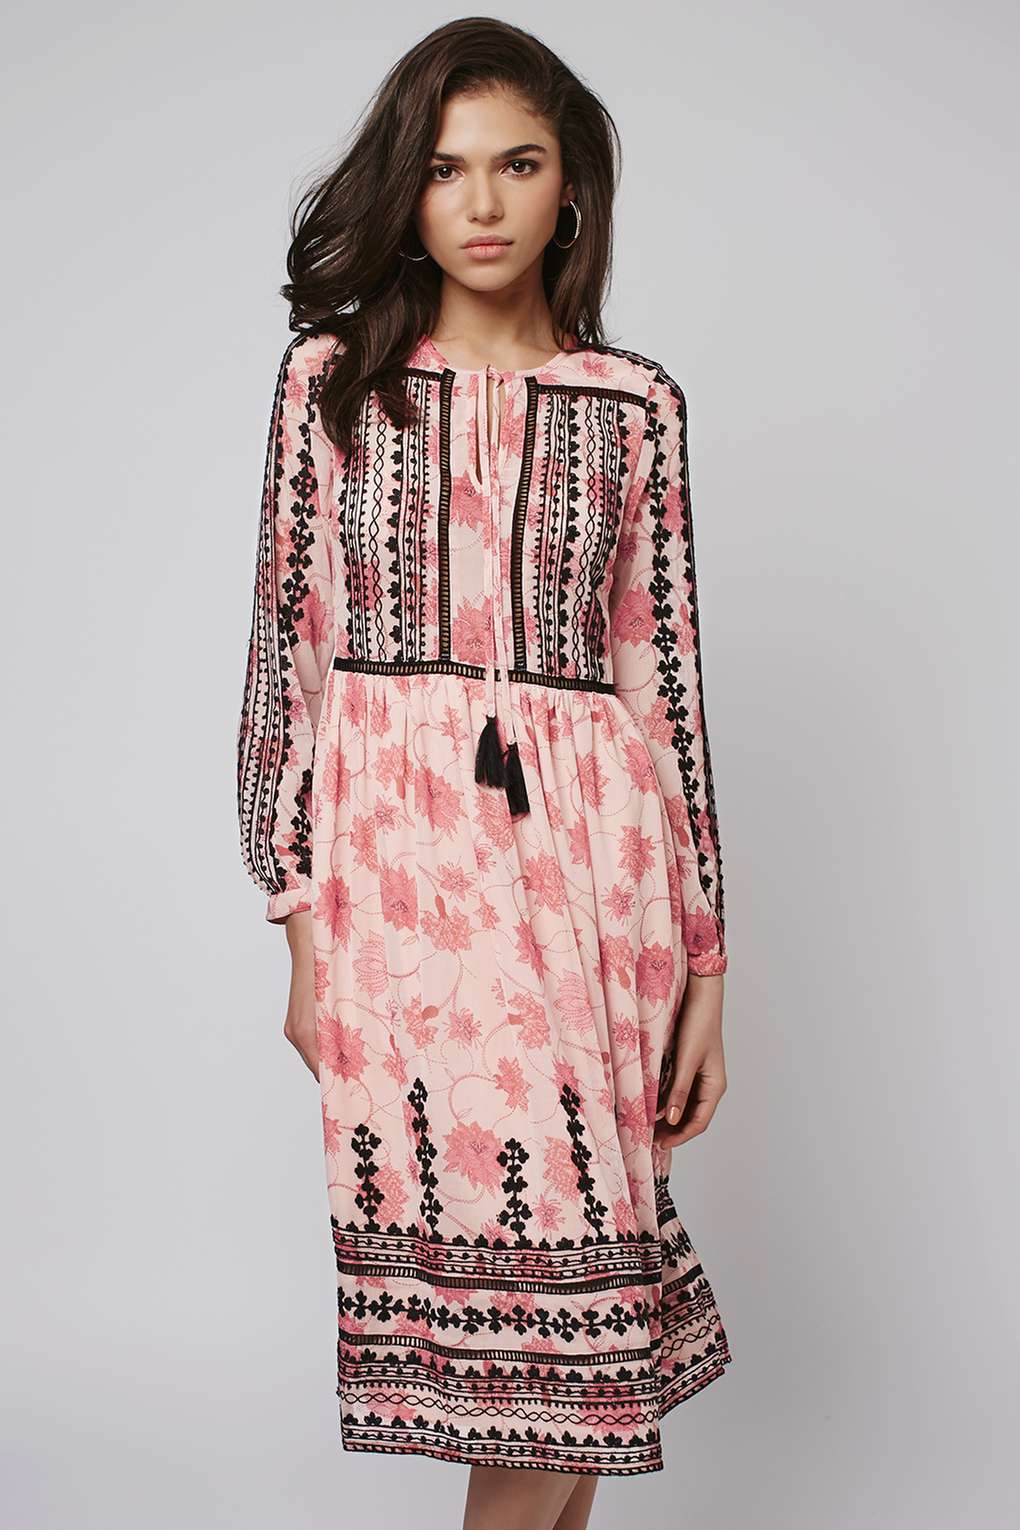 Pink and black embroidered dress from Topshop